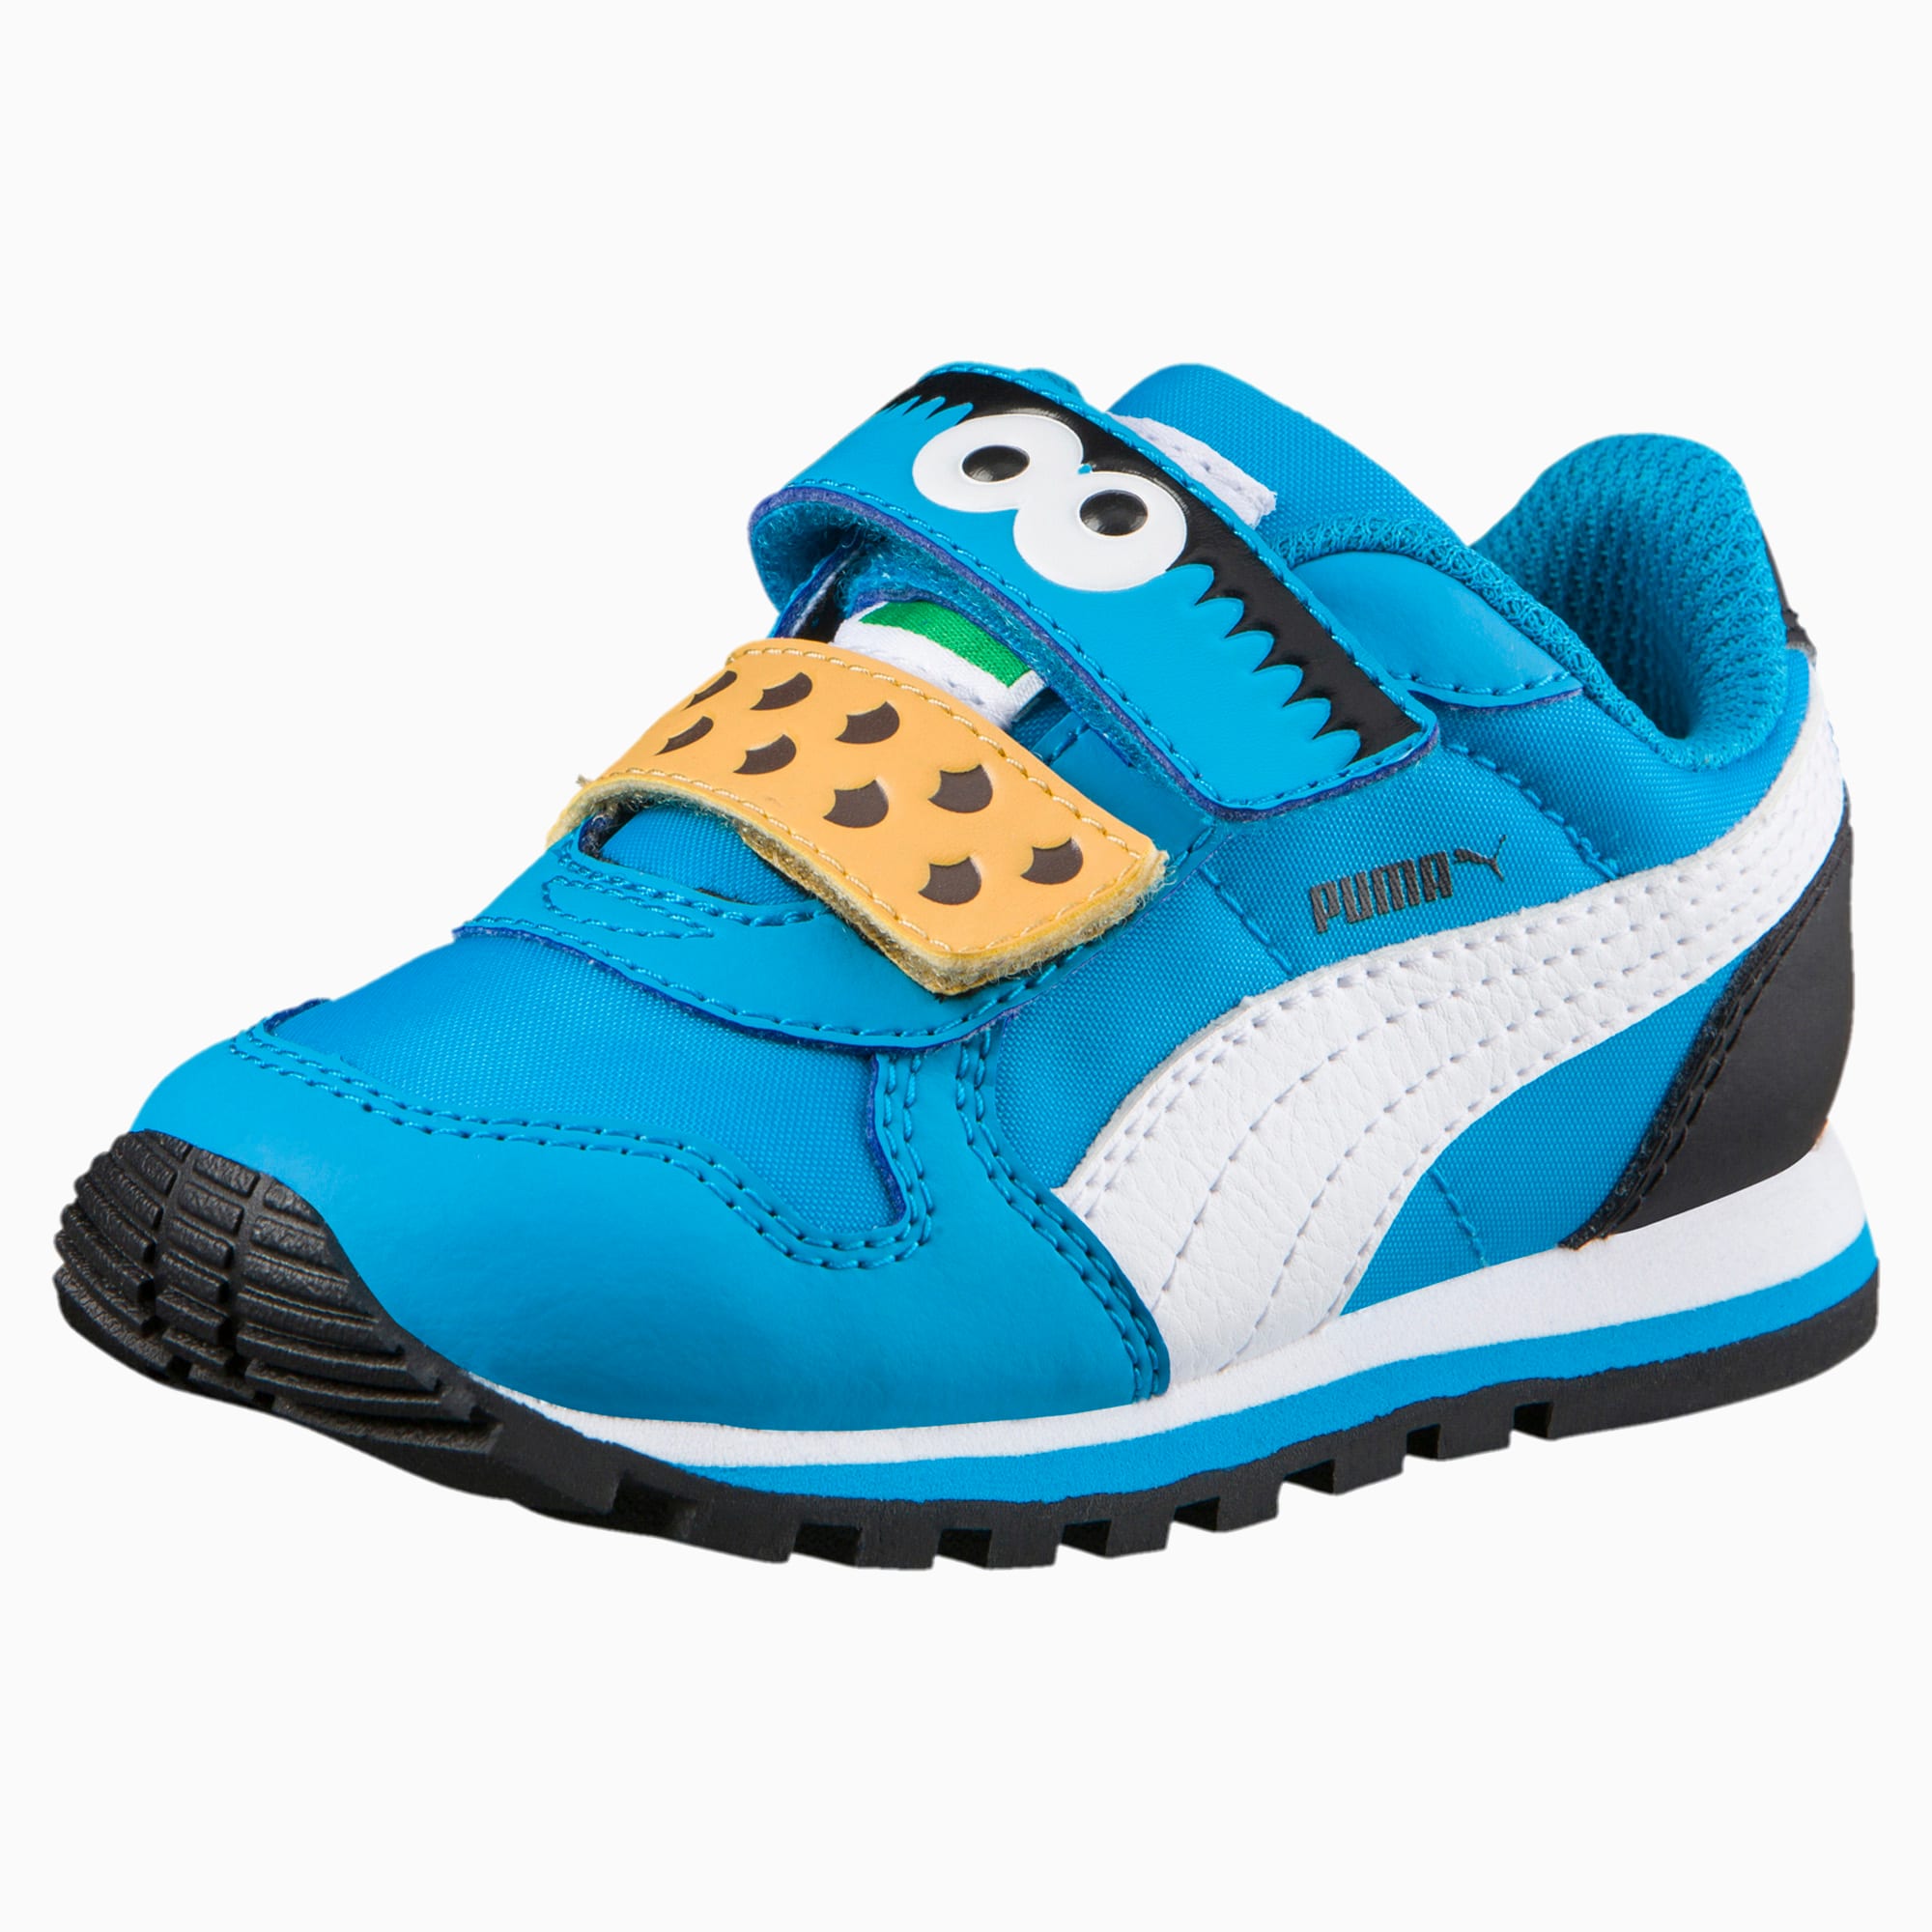 puma cookie monster shoes